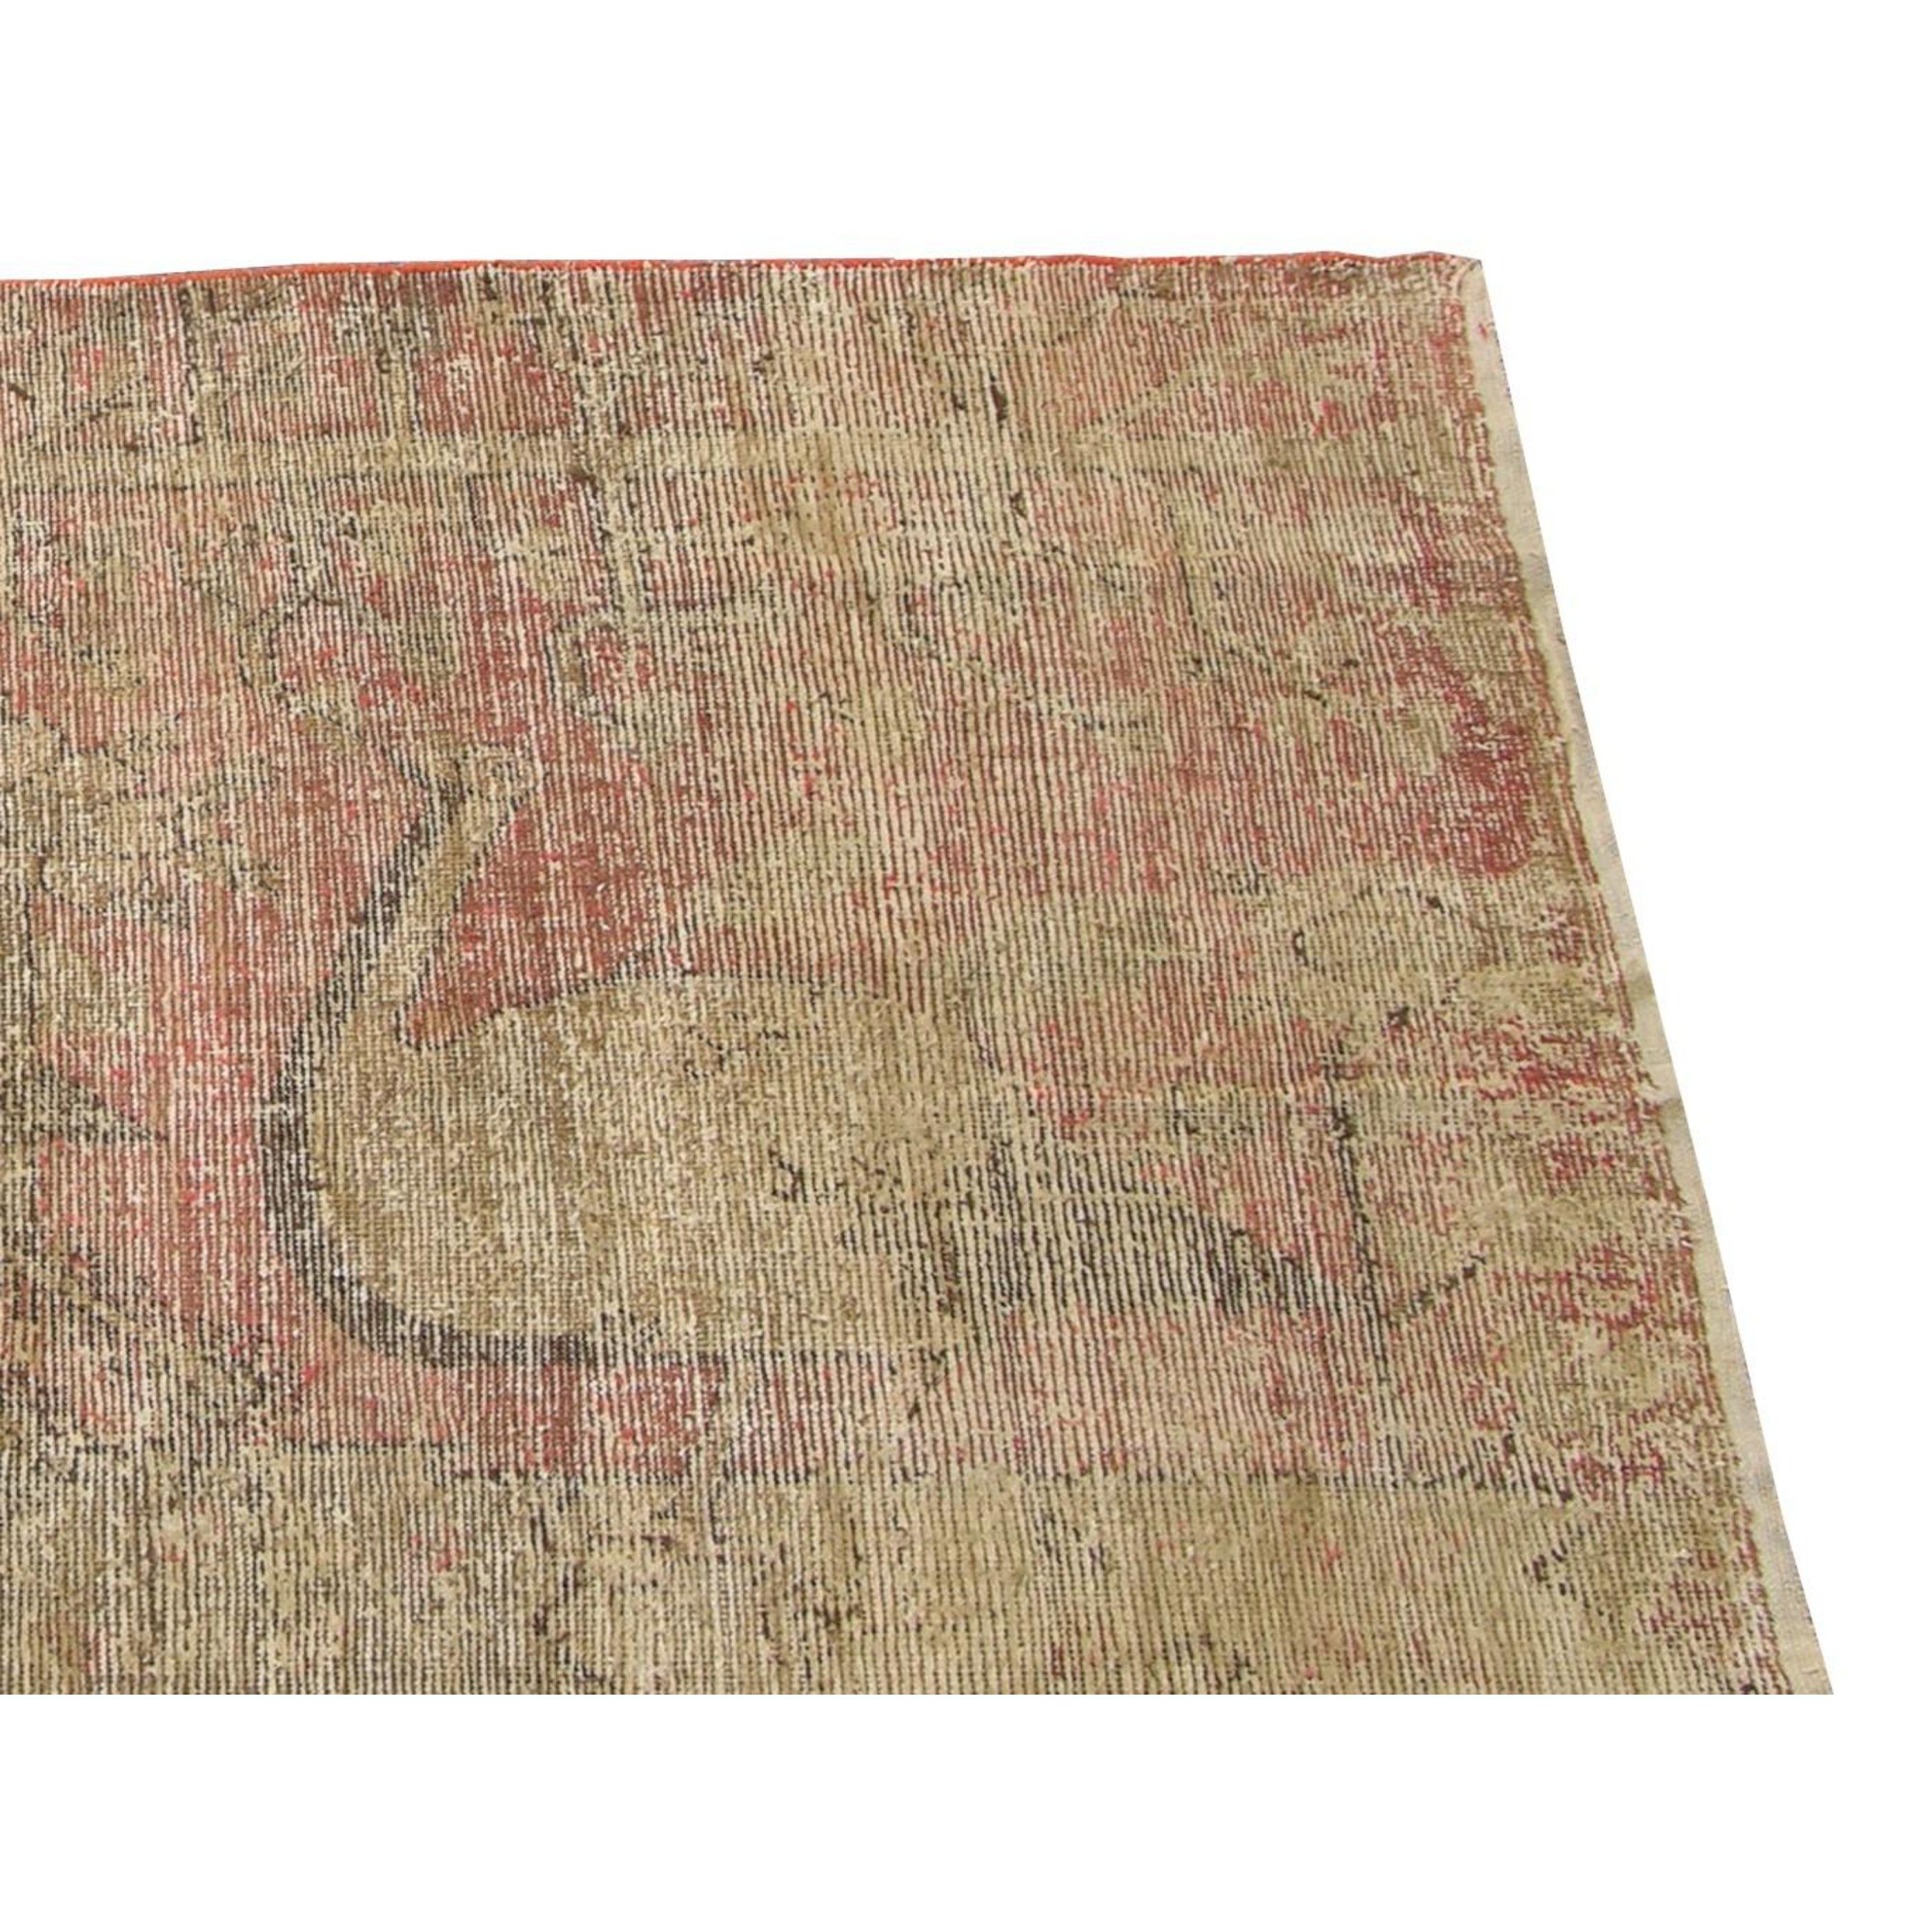 Up for sale is an antique Samakhand Uzbek rug, circa the 1900s.